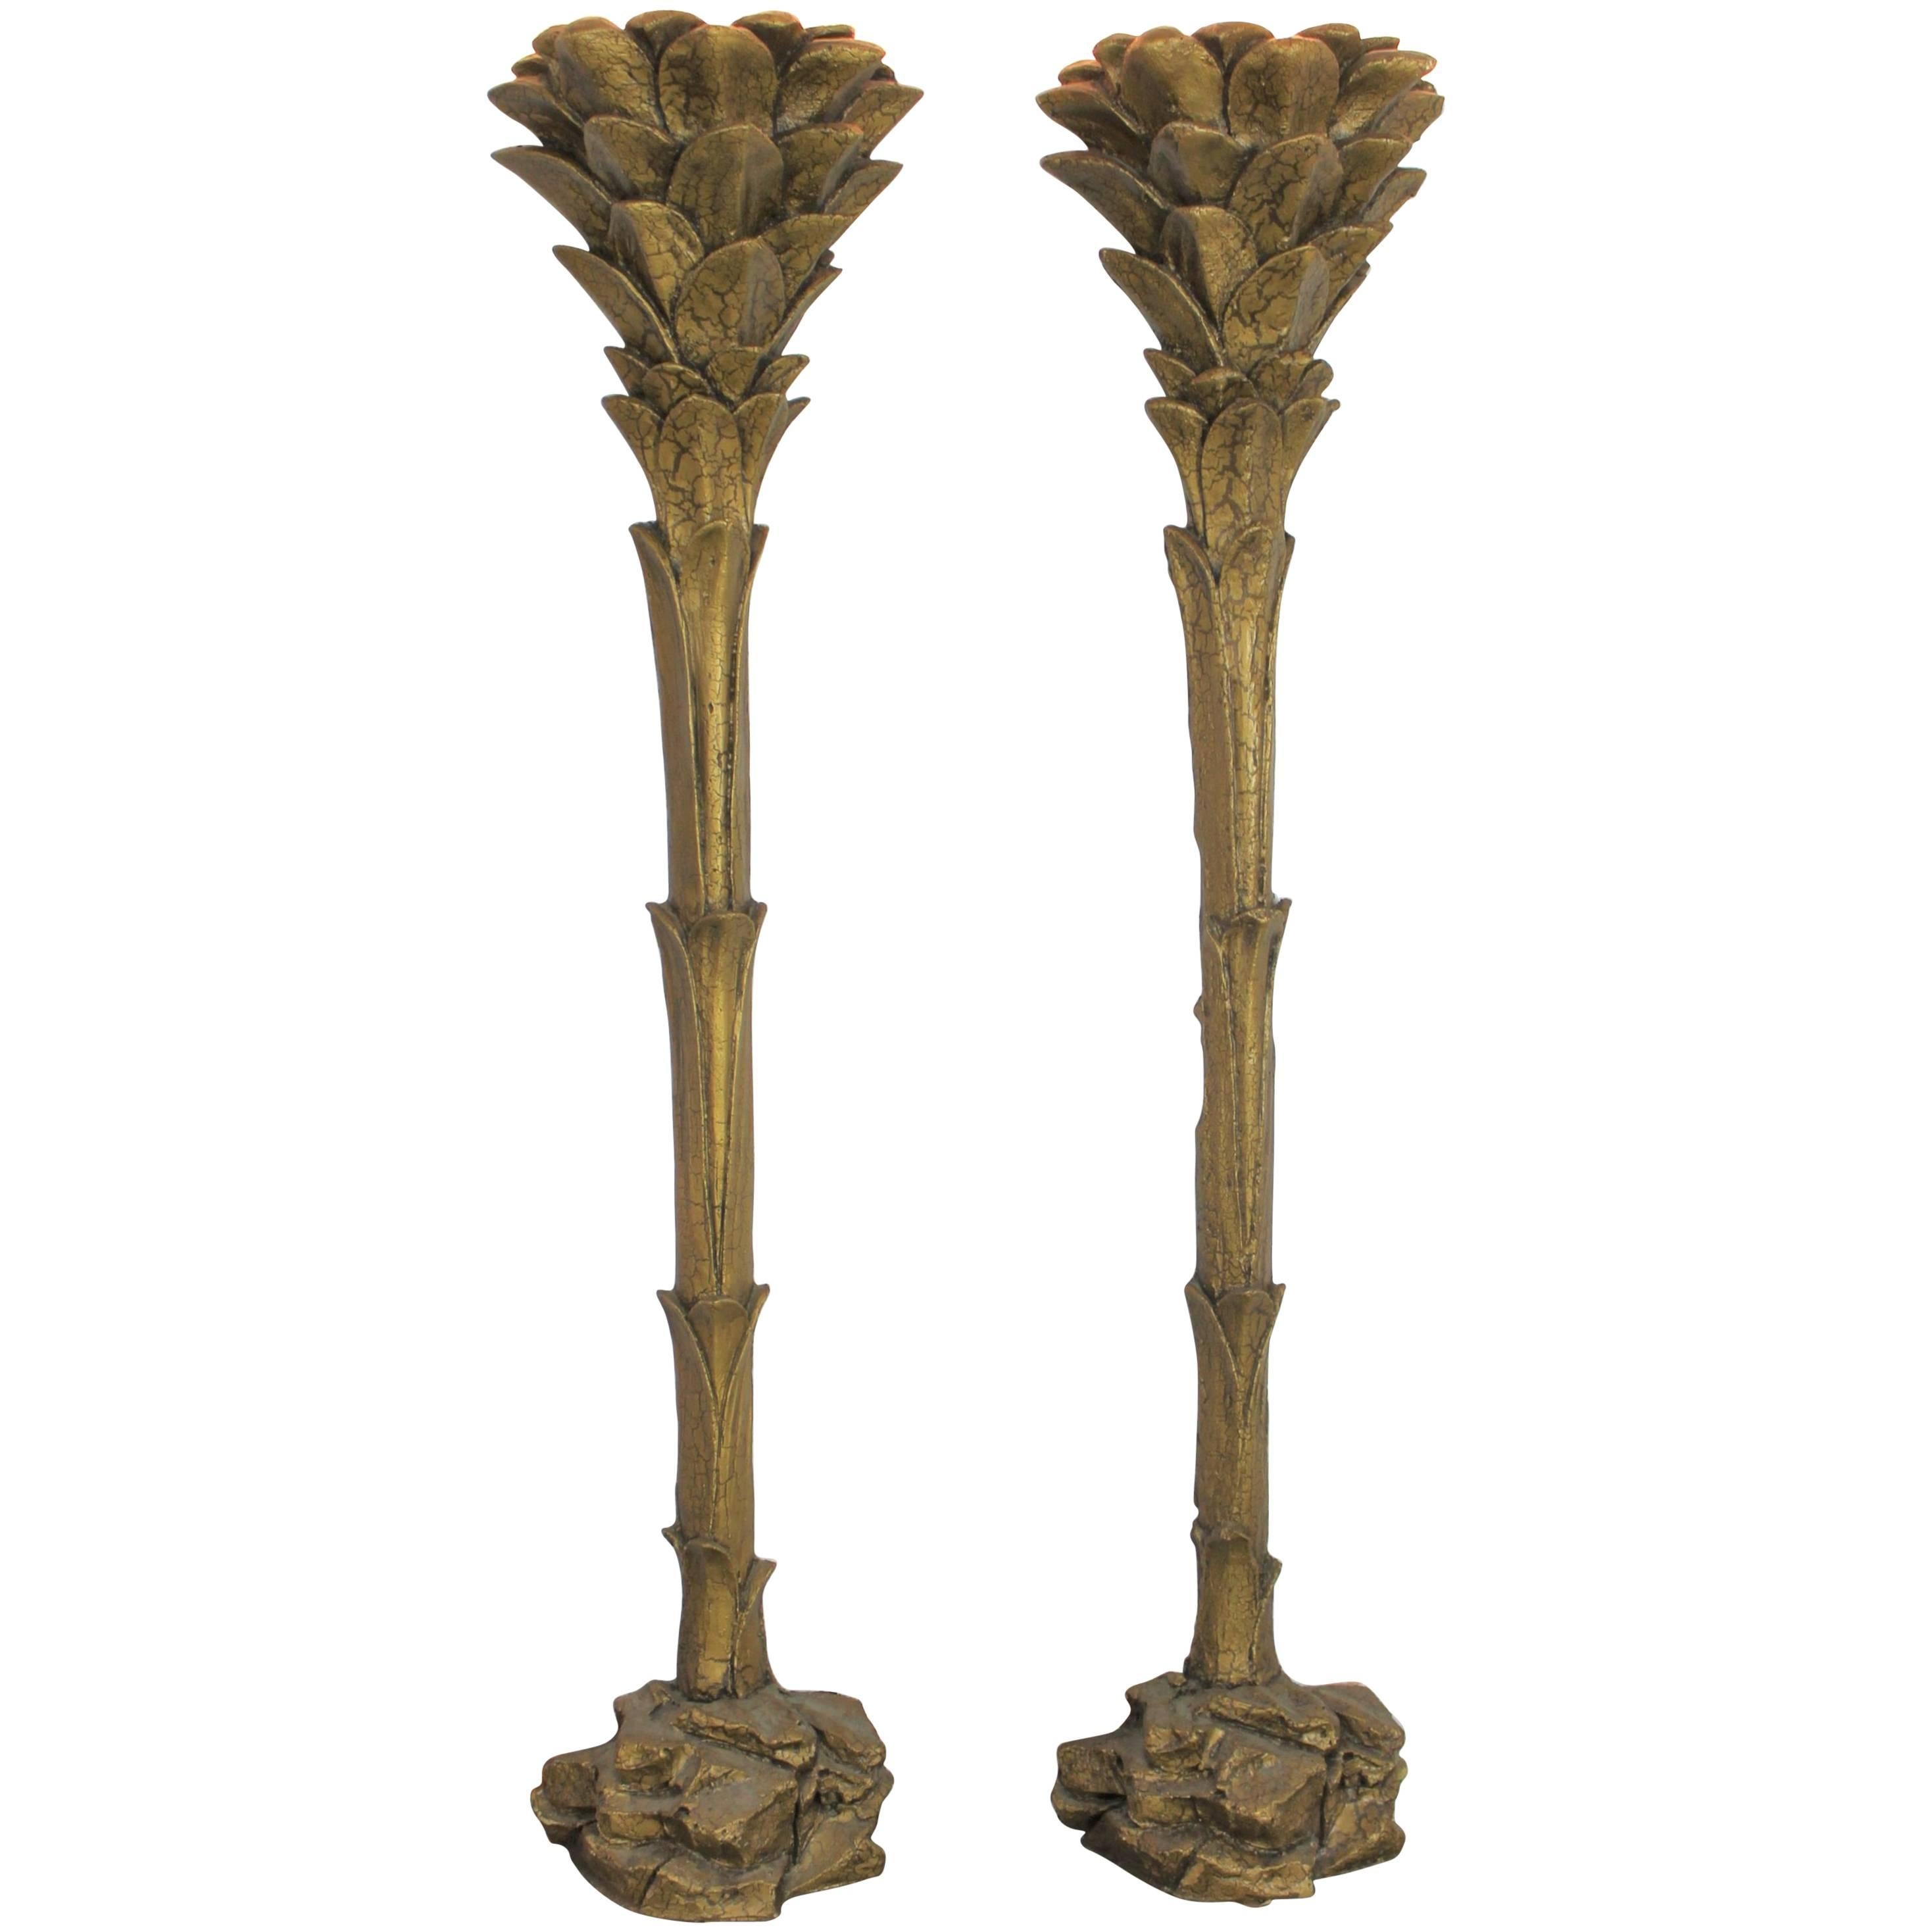 Gilded Palm Tree Torchiere Style Floor Wall Sconce Lamps after Serge Roche